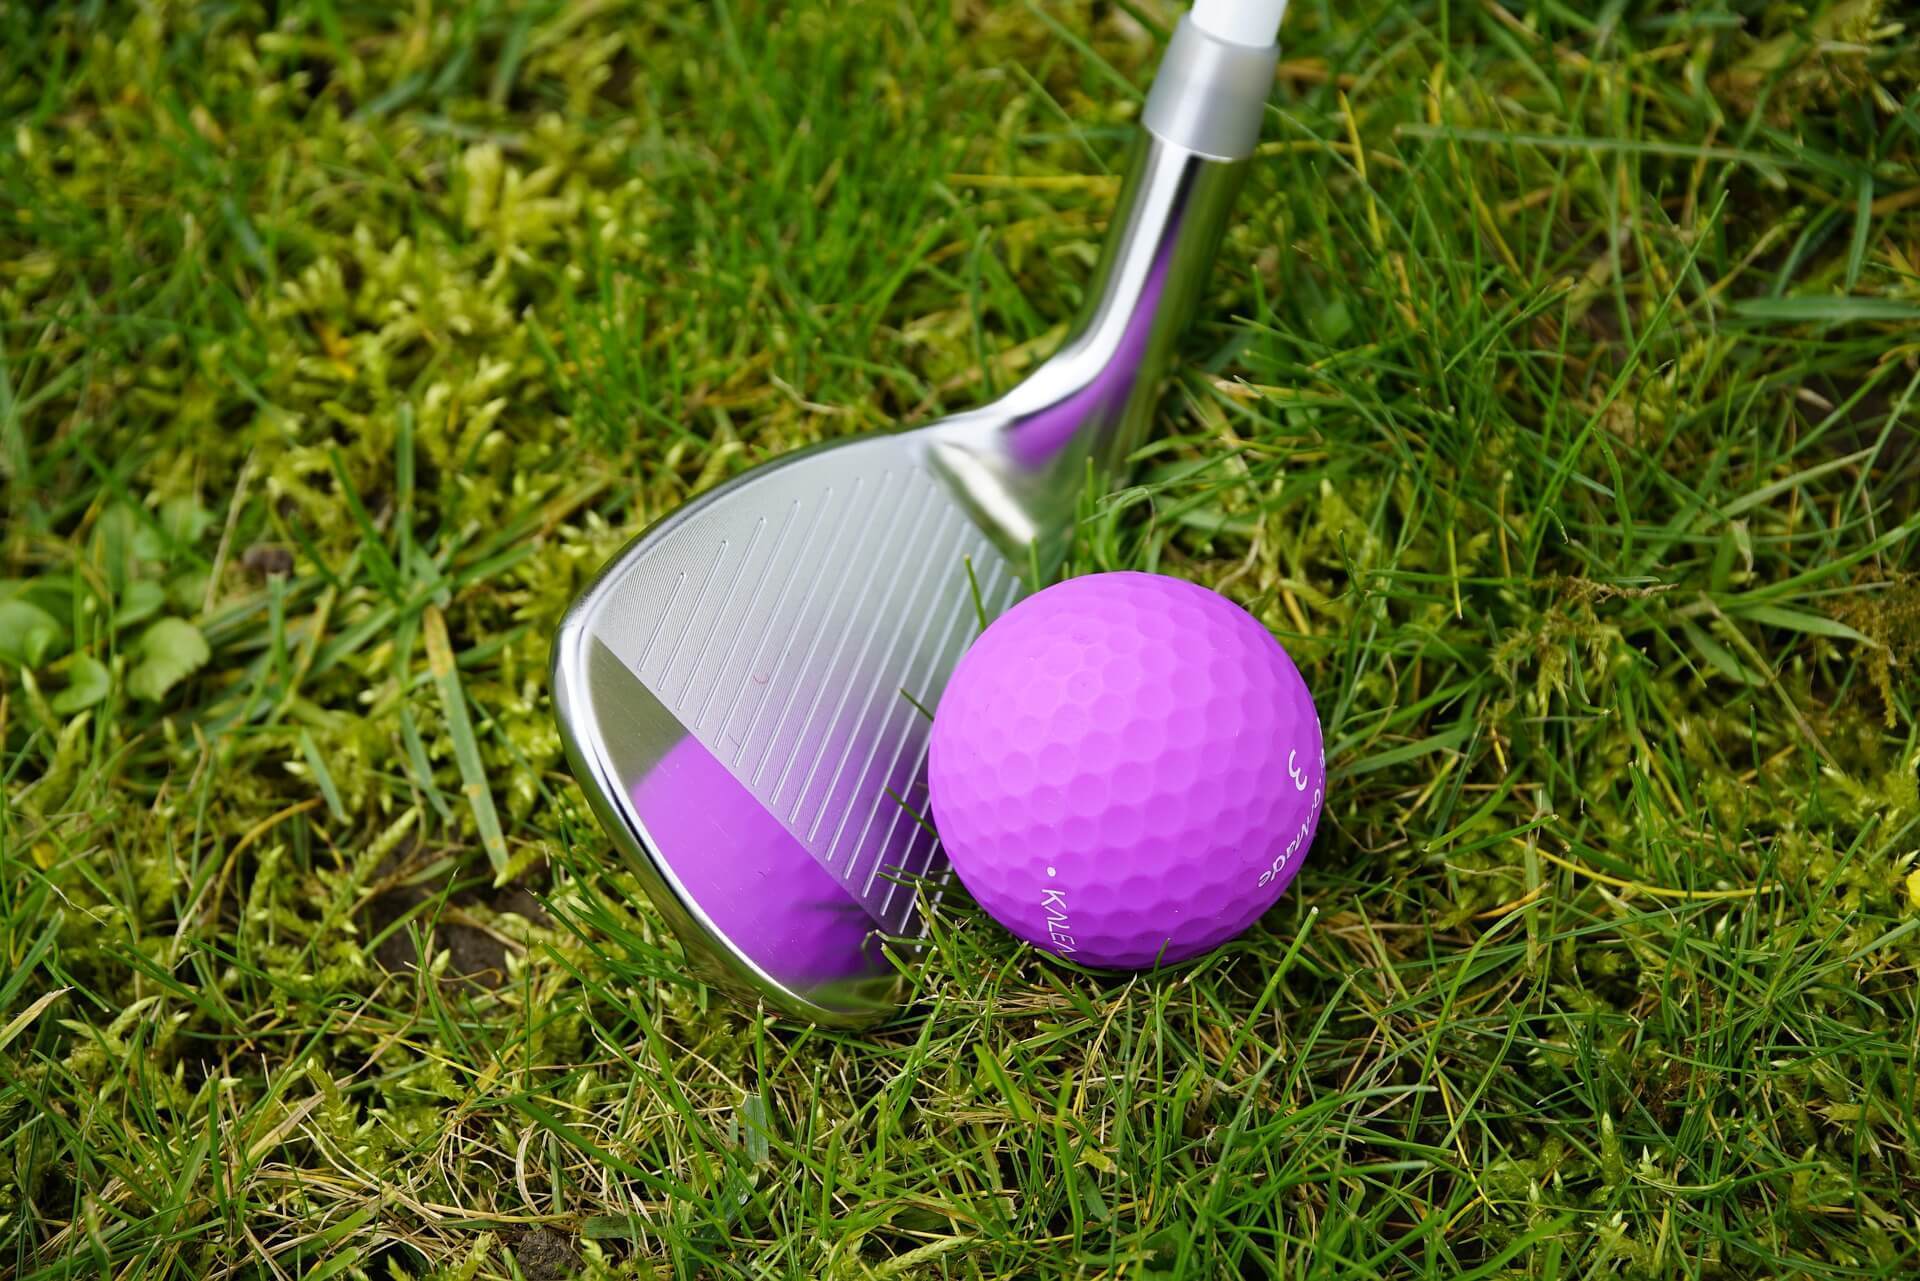 Close-up of golf wedge next to purple golf ball